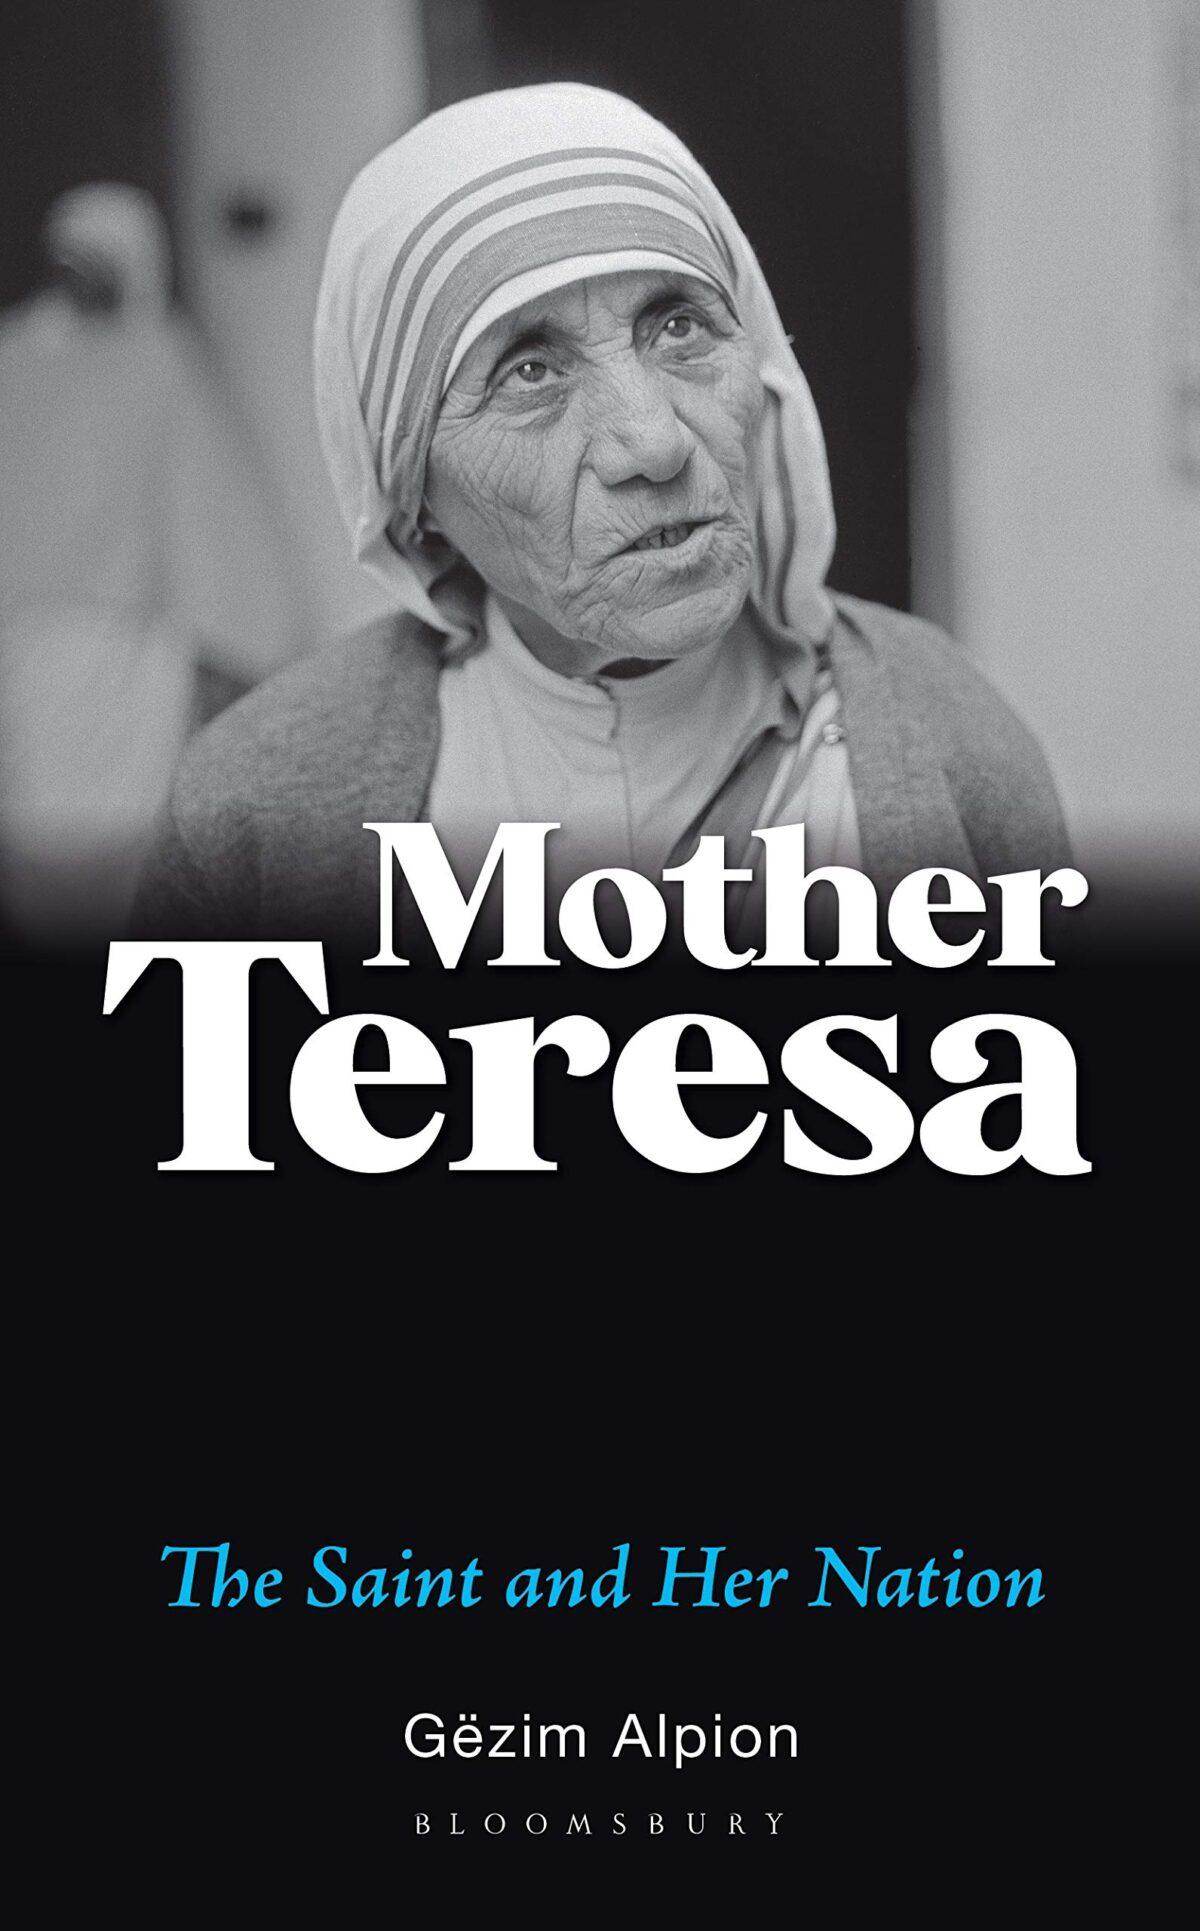 "Mother Teresa: The Saint and Her Nation" by Gëzim Alpion. (Bloomsbury Academic India, 2020)